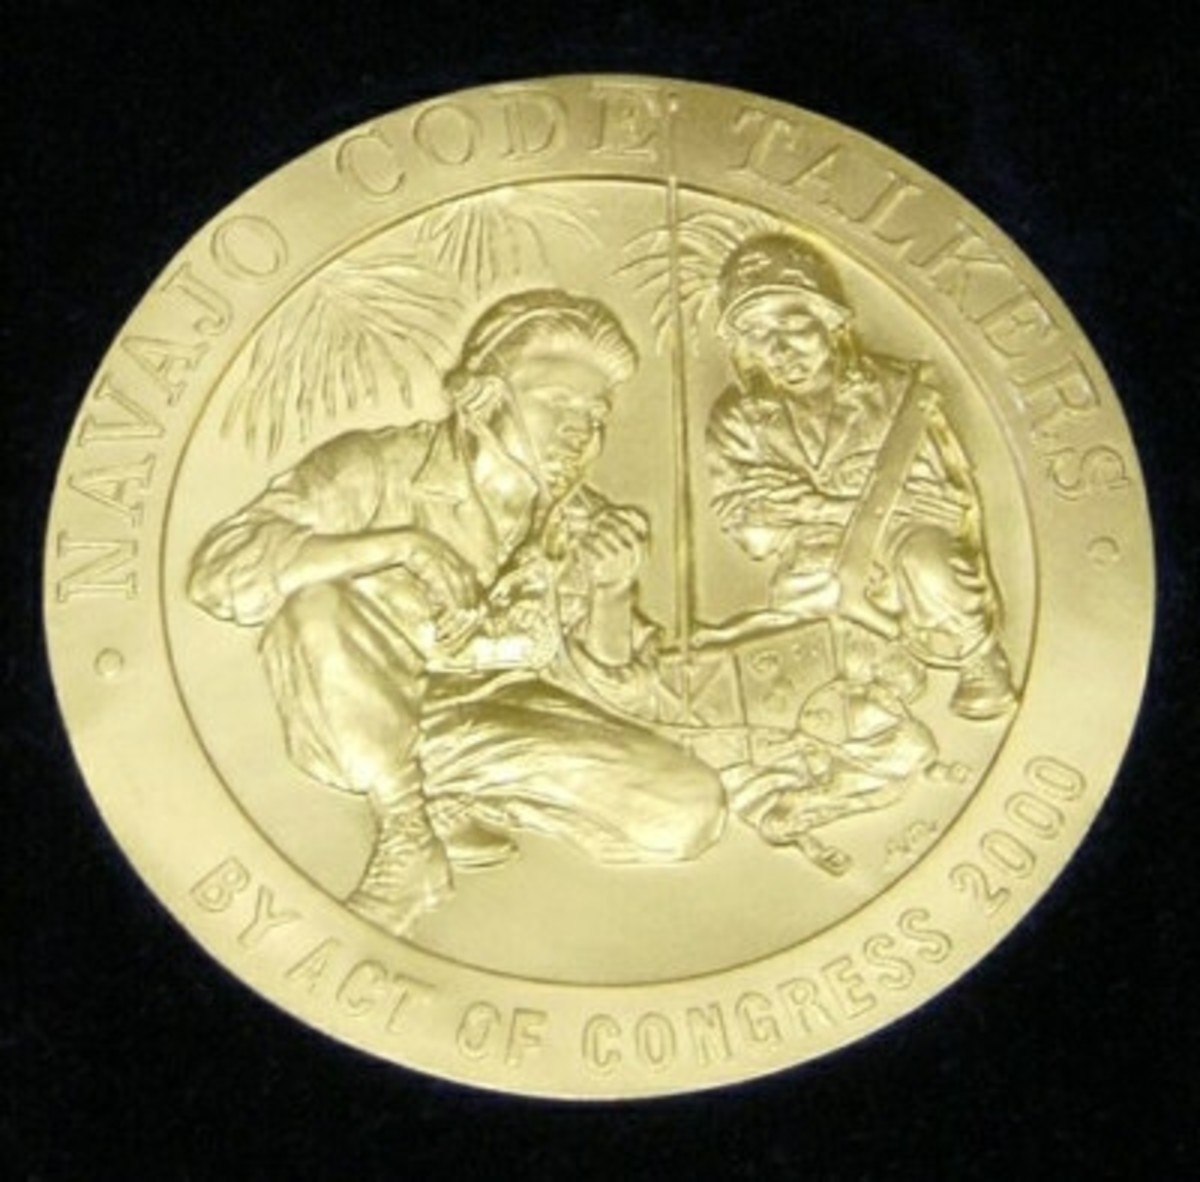 Congressional Gold Medal awarded to Navajo Code Talkers in 2000.